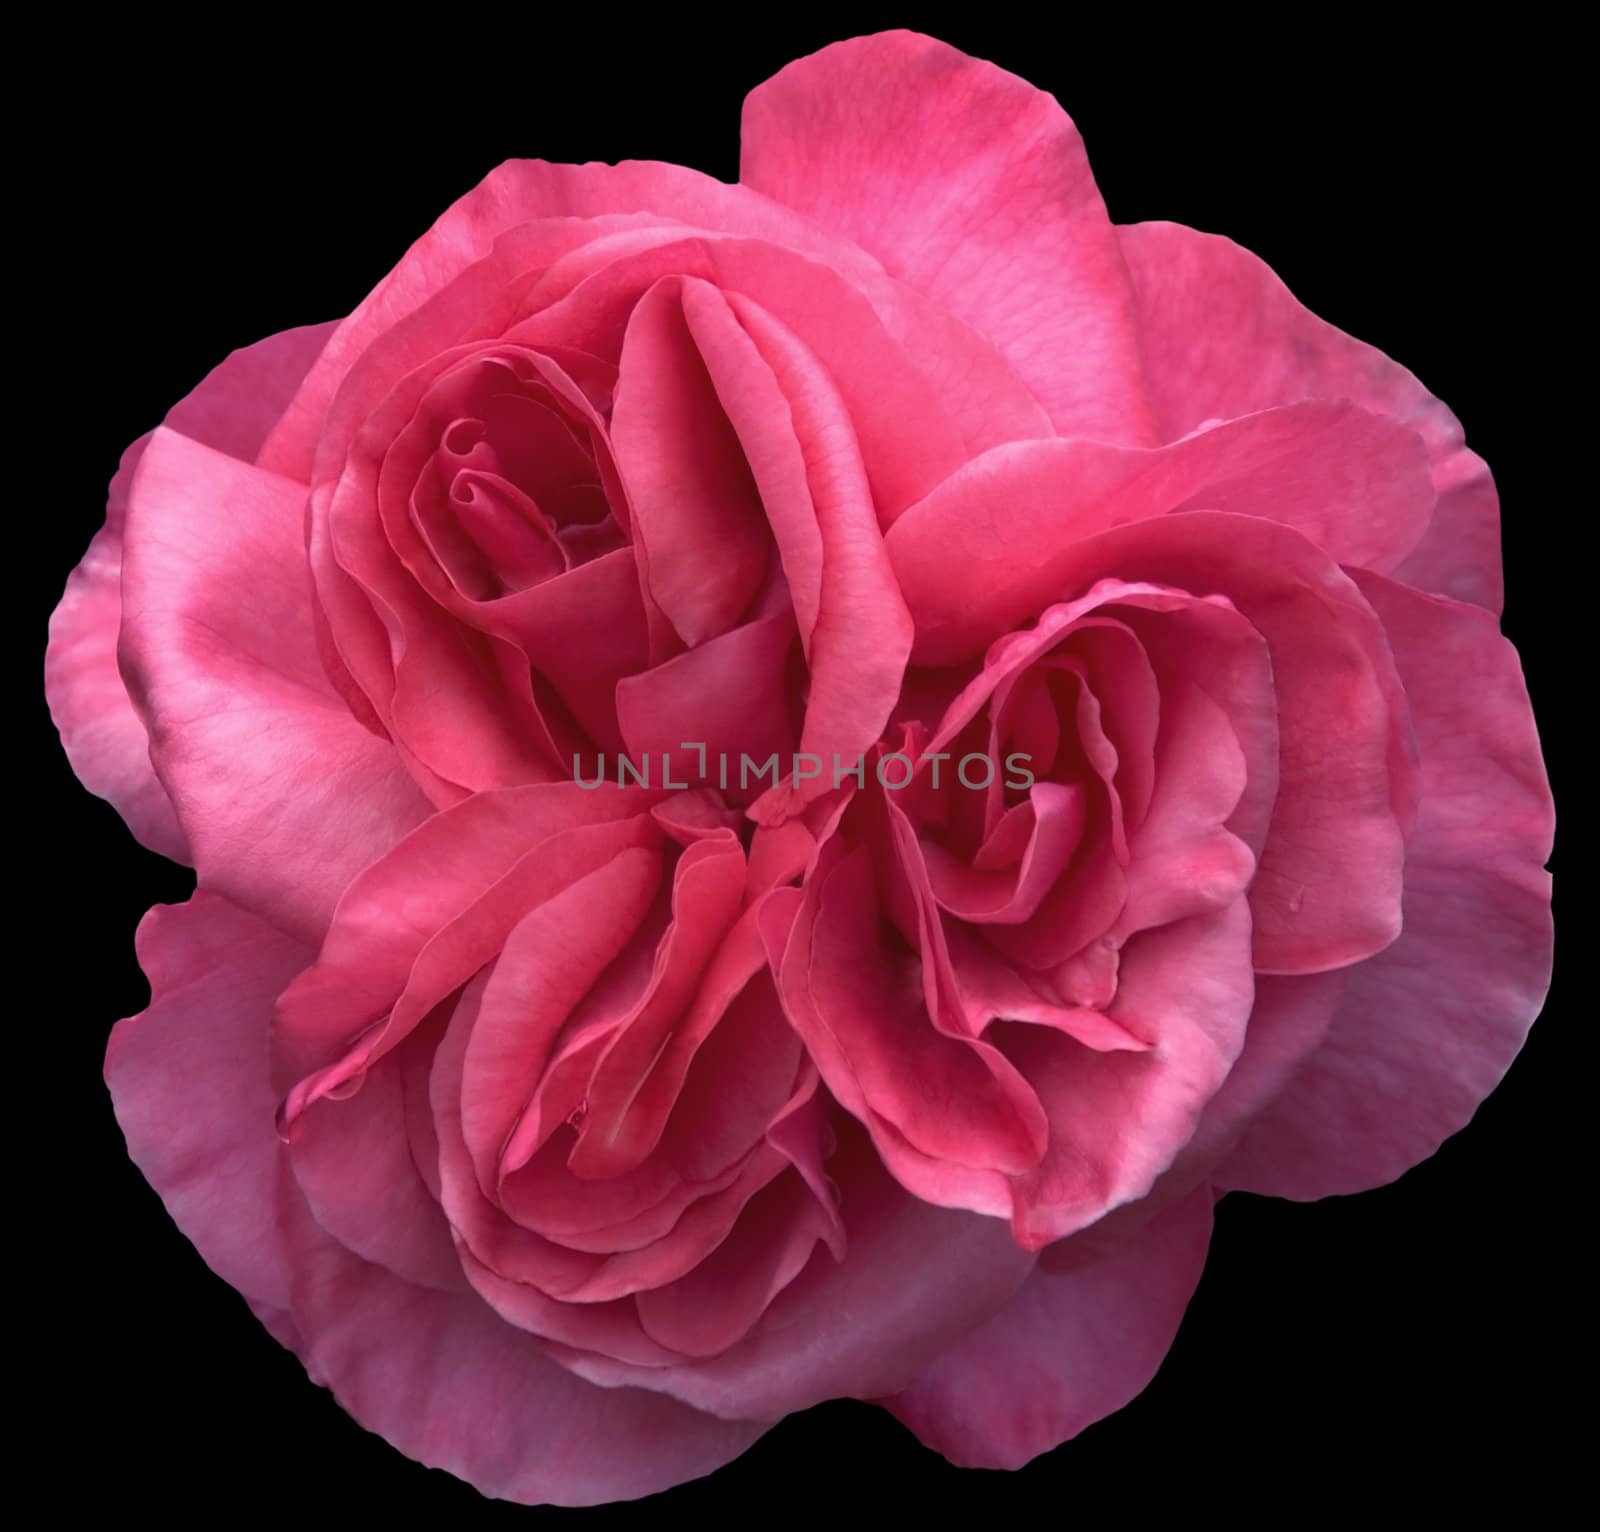 Full-blown pink rose with triple centers (isolation on black with clipping path)